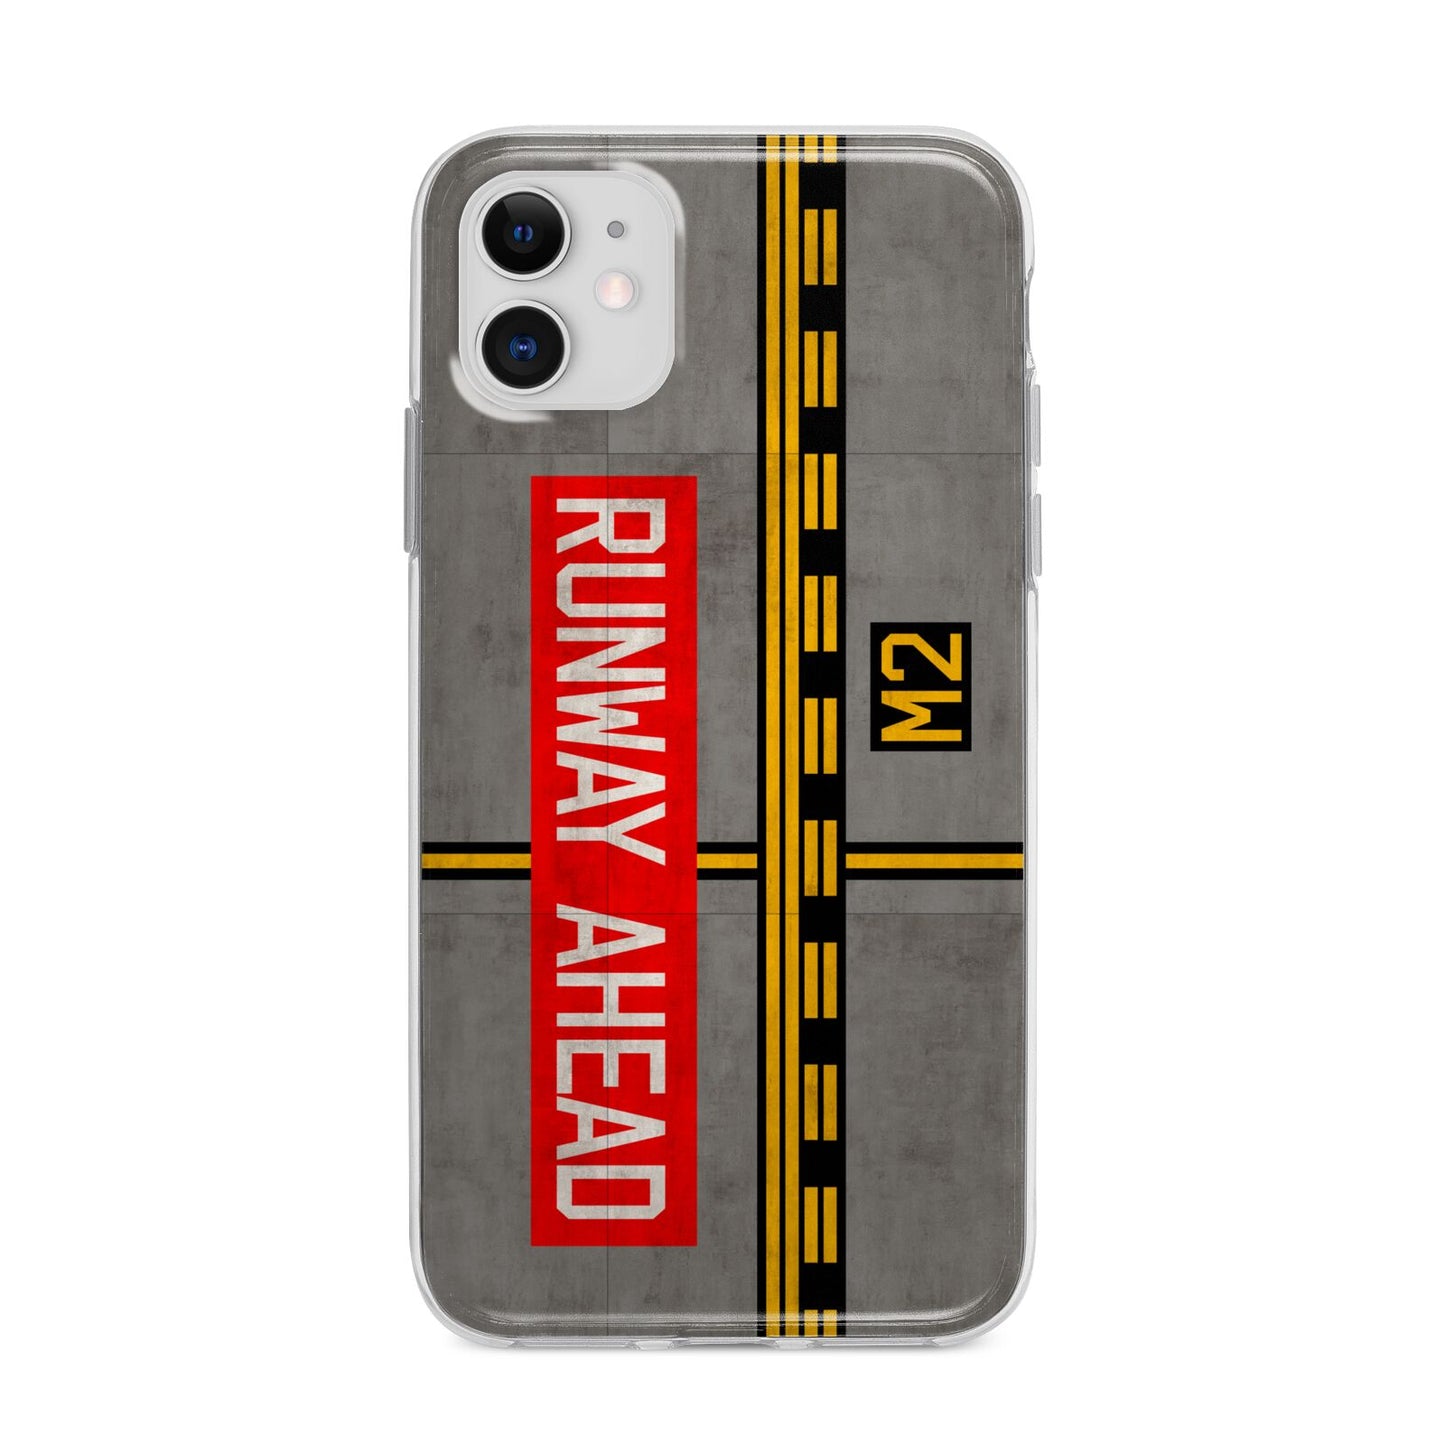 Runway Ahead Apple iPhone 11 in White with Bumper Case